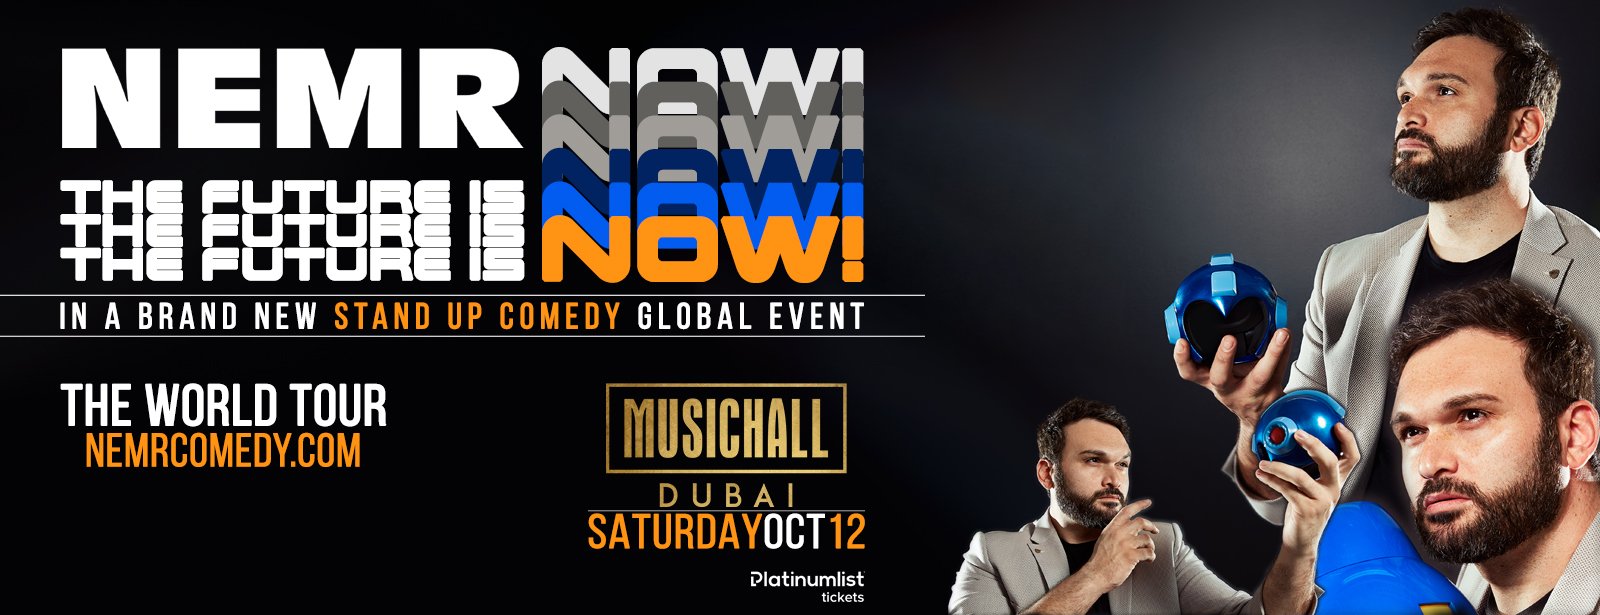 Nemr – The Future is NOW! Comedy Show - Coming Soon in UAE